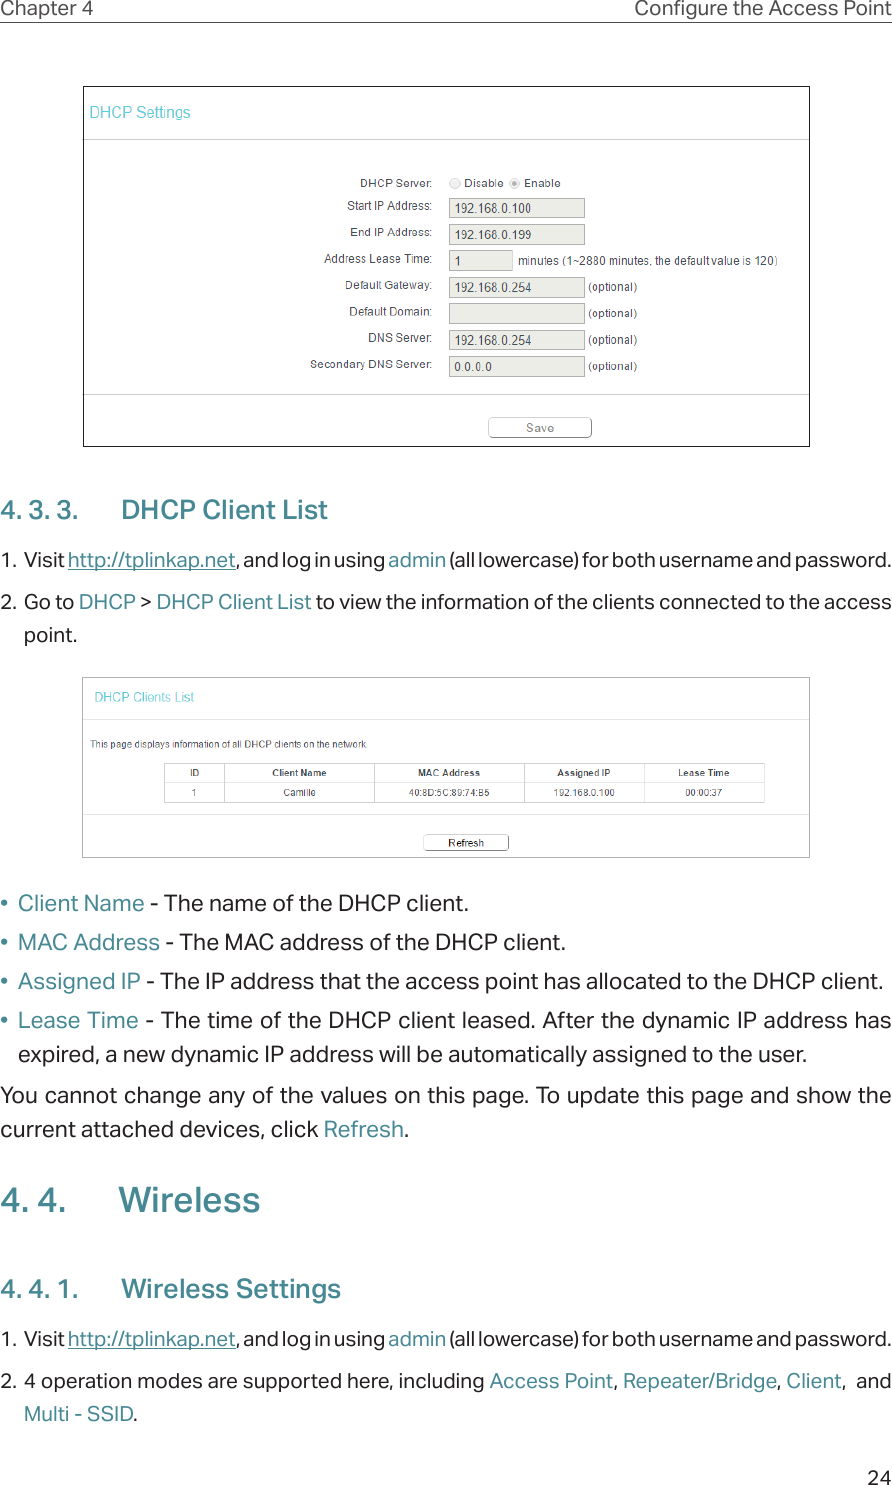 24Chapter 4 Congure the Access Point4. 3. 3.  DHCP Client List1. Visit http://tplinkap.net, and log in using admin (all lowercase) for both username and password.2. Go to DHCP &gt; DHCP Client List to view the information of the clients connected to the access point.•  Client Name - The name of the DHCP client.•  MAC Address - The MAC address of the DHCP client. •  Assigned IP - The IP address that the access point has allocated to the DHCP client.•  Lease Time - The time of the DHCP client leased. After the dynamic IP address has expired, a new dynamic IP address will be automatically assigned to the user.  You cannot change any of the values on this page. To update this page and show the current attached devices, click Refresh.4. 4.  Wireless4. 4. 1.  Wireless Settings1. Visit http://tplinkap.net, and log in using admin (all lowercase) for both username and password.2. 4 operation modes are supported here, including Access Point, Repeater/Bridge, Client,  and Multi - SSID.